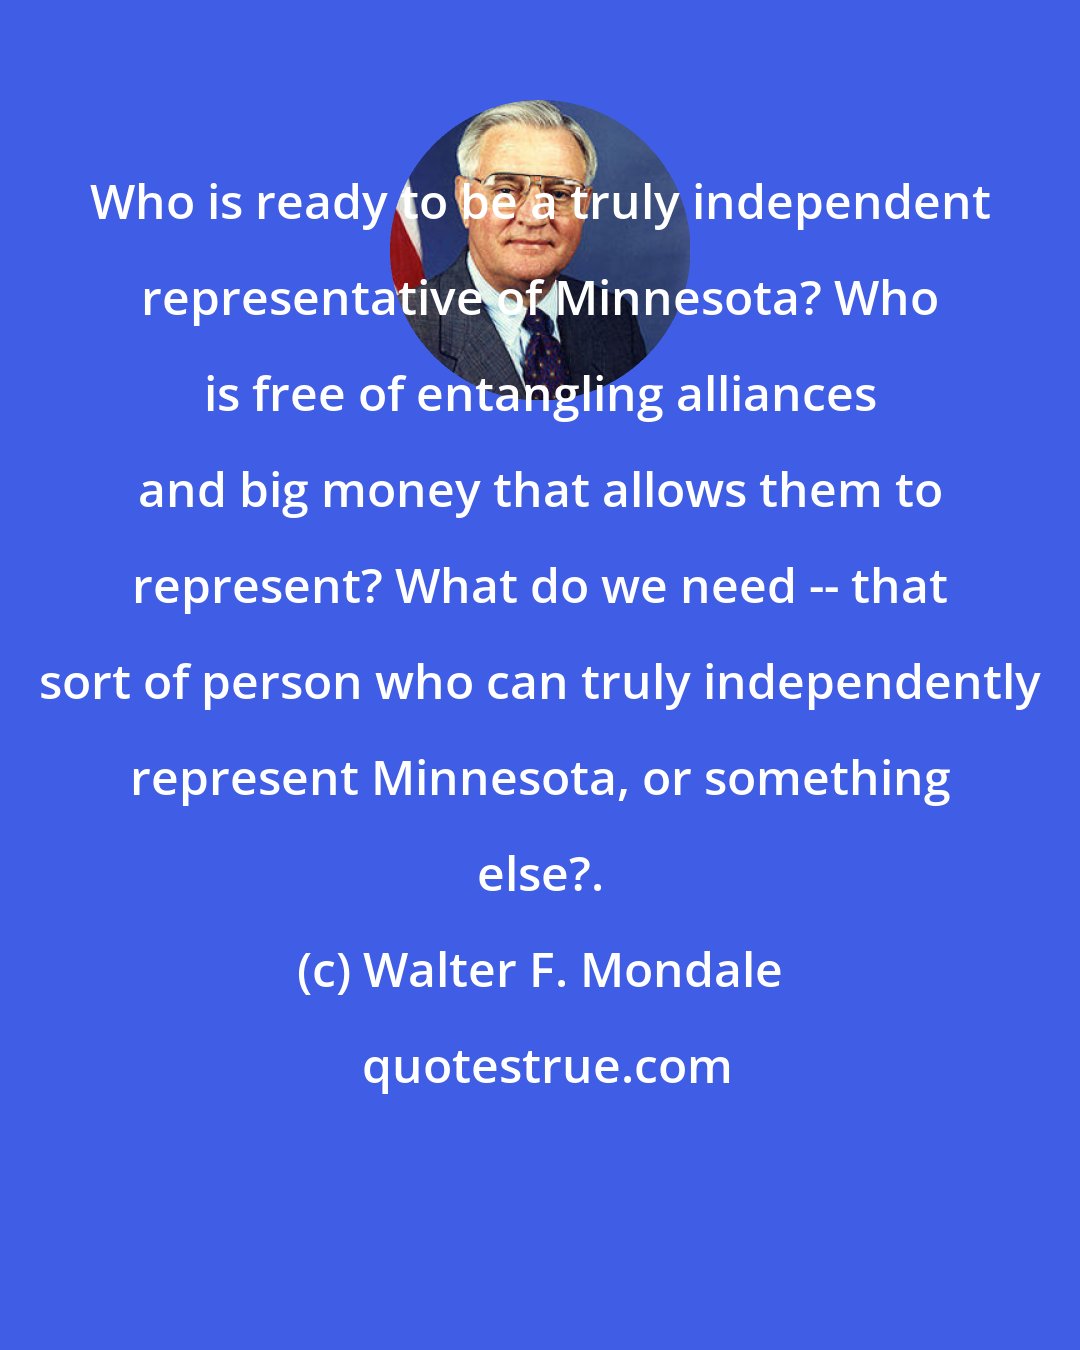 Walter F. Mondale: Who is ready to be a truly independent representative of Minnesota? Who is free of entangling alliances and big money that allows them to represent? What do we need -- that sort of person who can truly independently represent Minnesota, or something else?.